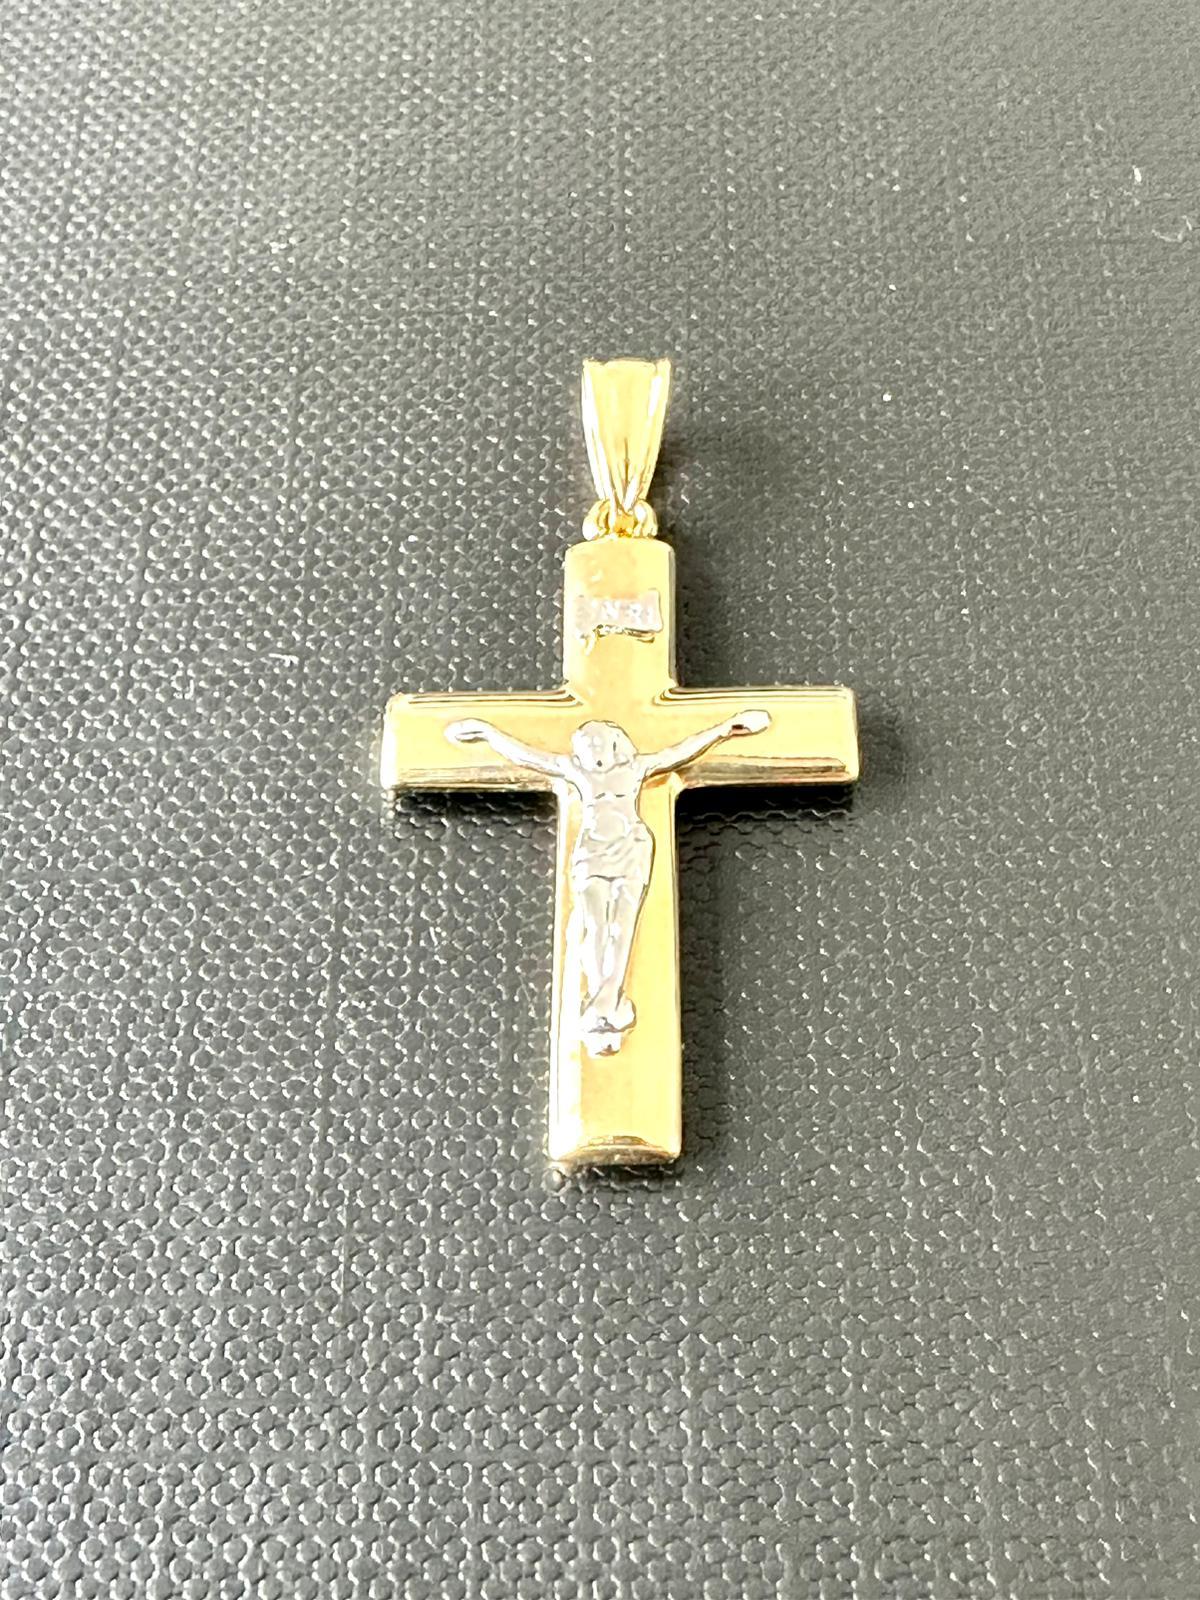 Italian jewelry craftsmanship is renowned worldwide, known for its attention to detail, fine quality, and artistic flair. Owning an Italian-made modern-contemporary 18kt yellow and white gold crucifix represents a blend of religious symbolism,